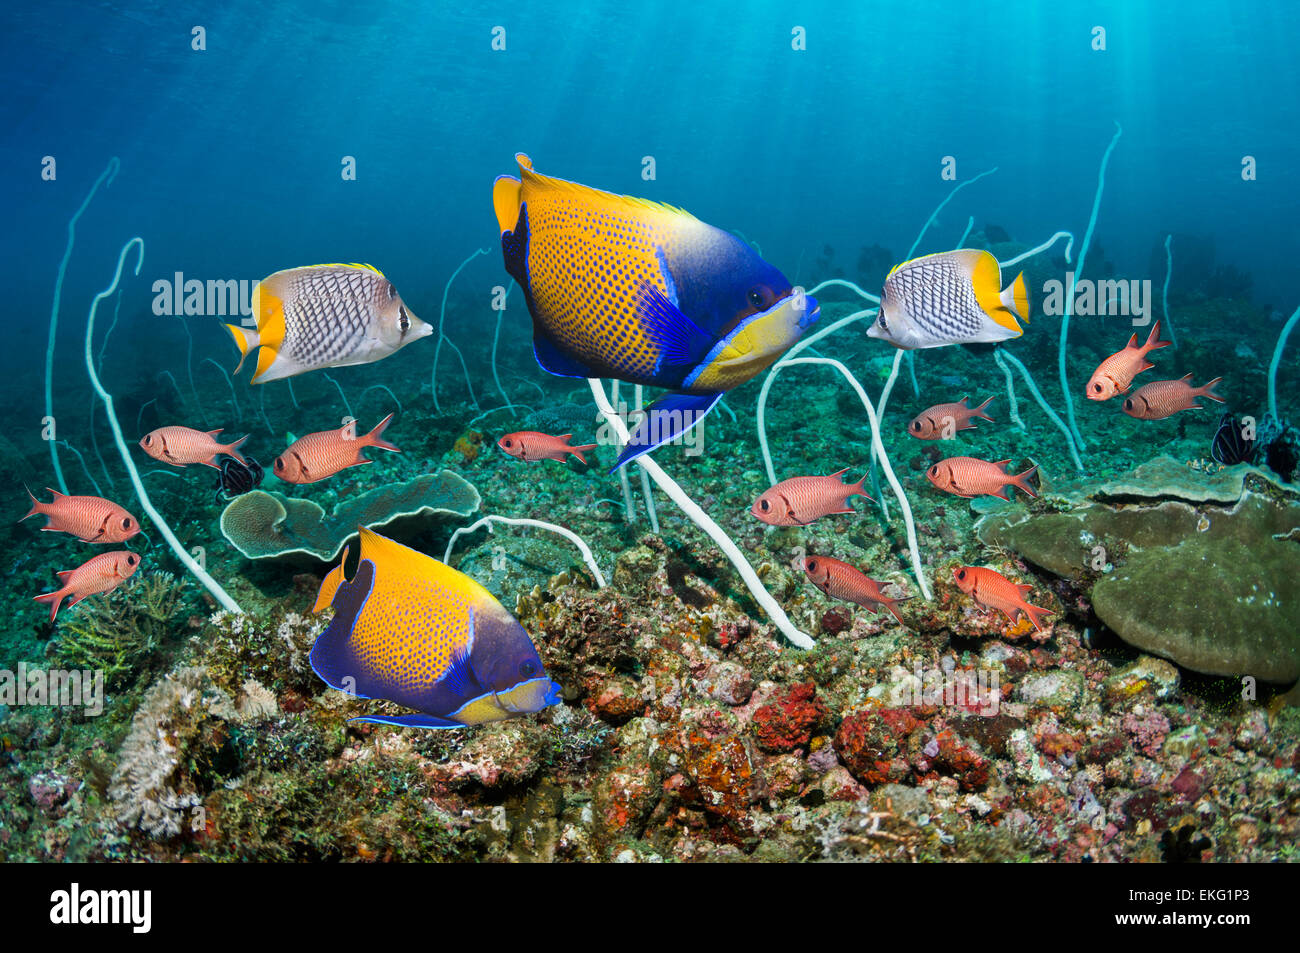 Blue-girdled angelfish (Pomacanthus navarchus), Pinecone soldierfish and a pair of Yellowtail or Pearlscale butterflyfish Stock Photo